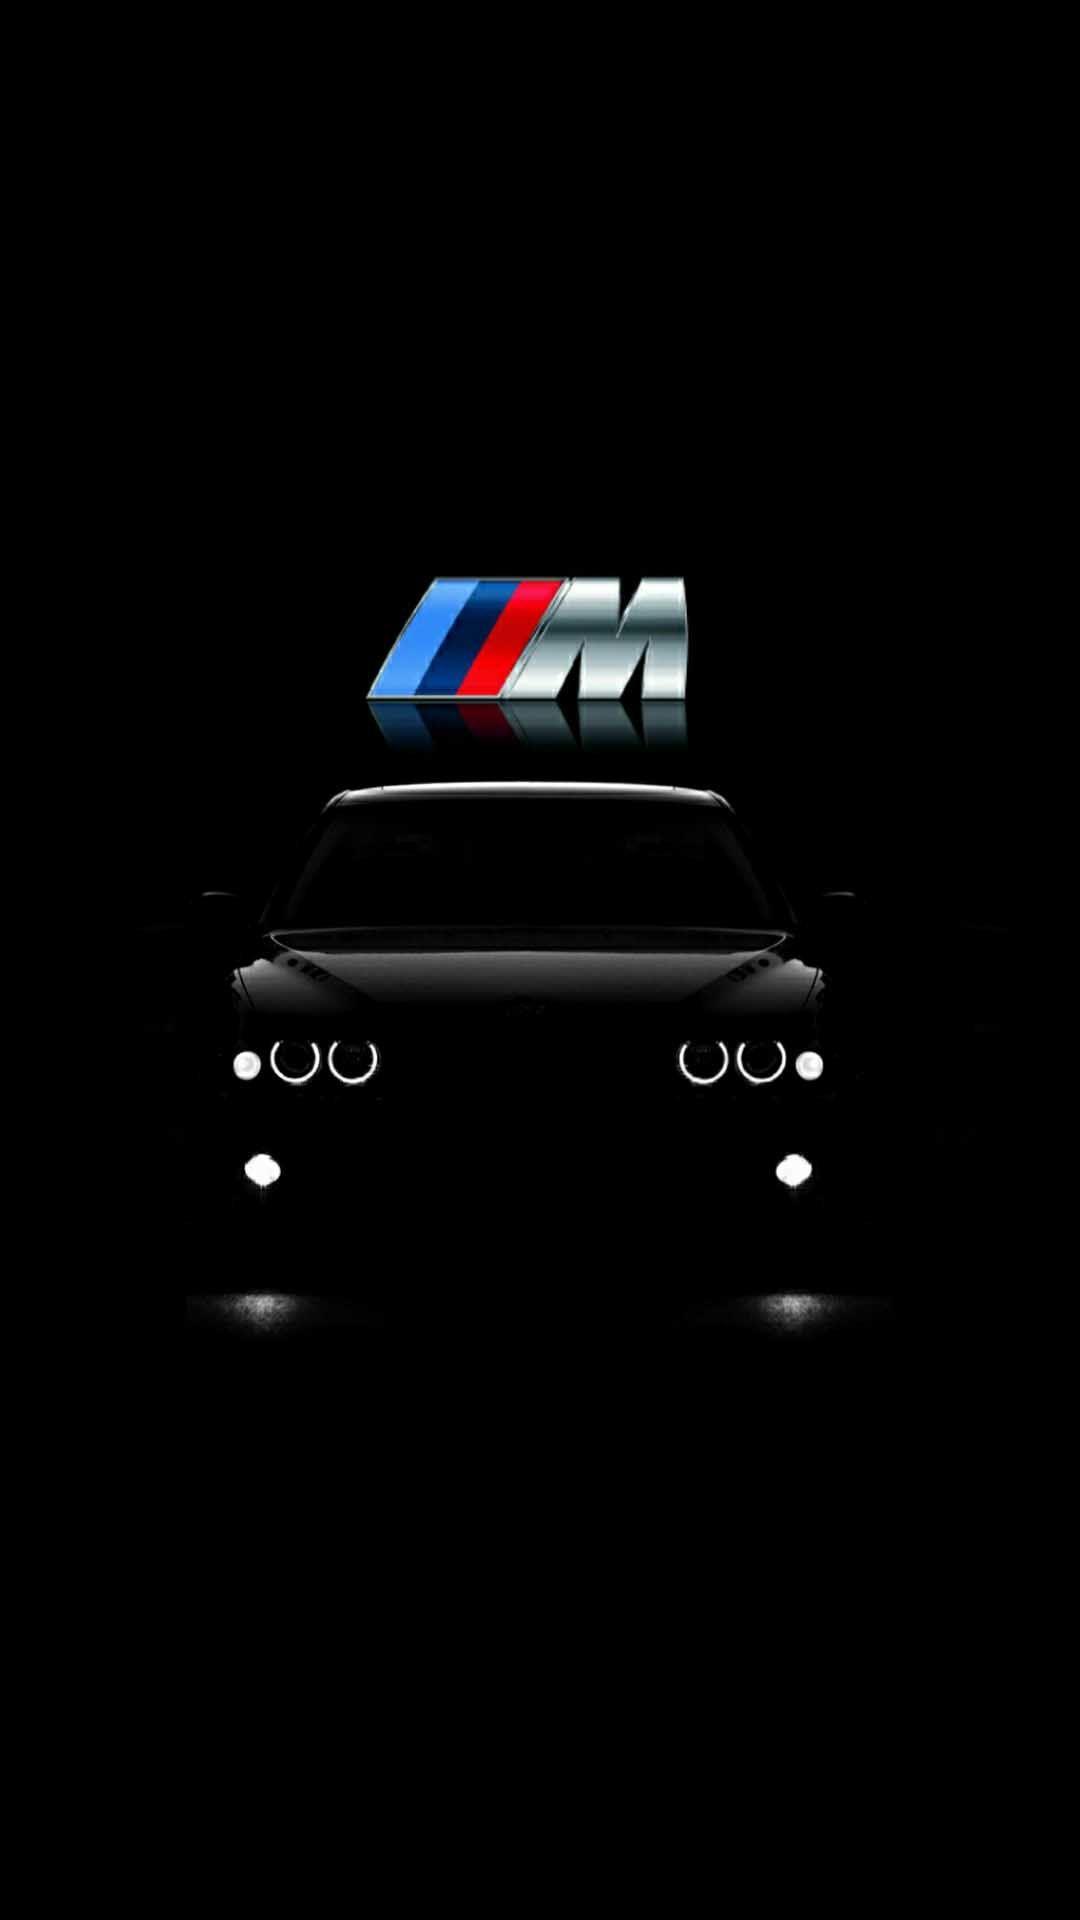 BMW iPhone Wallpapers - Top Free BMW